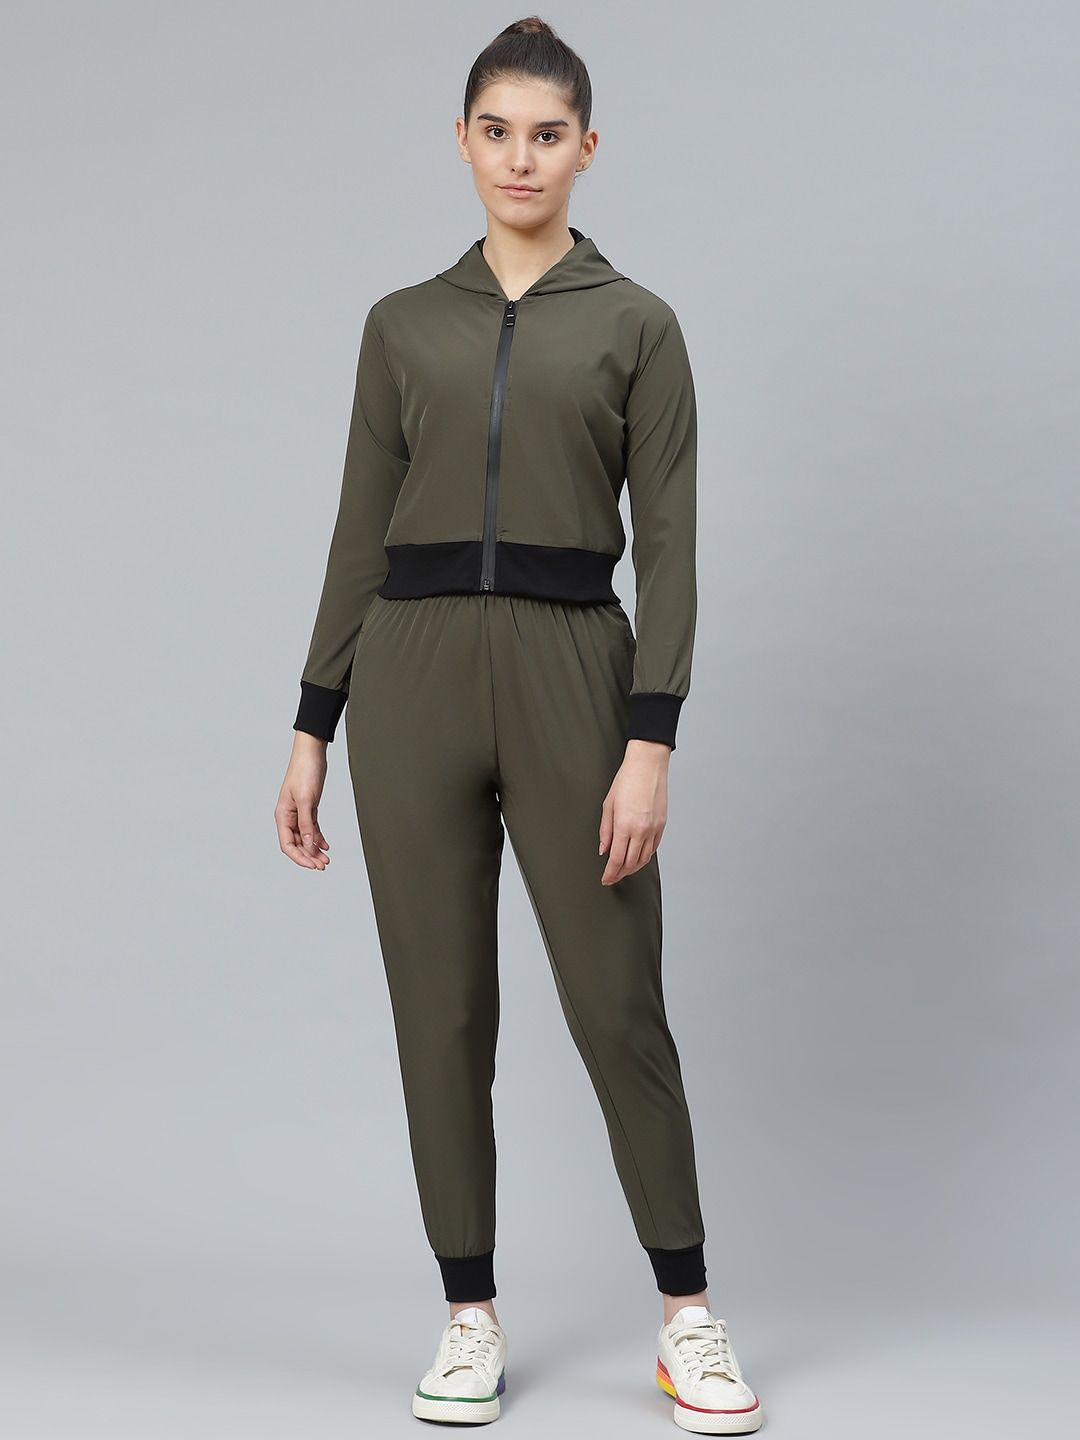 Chkokko Women Olive Green Solid Hooded Training Tracksuit Price in India